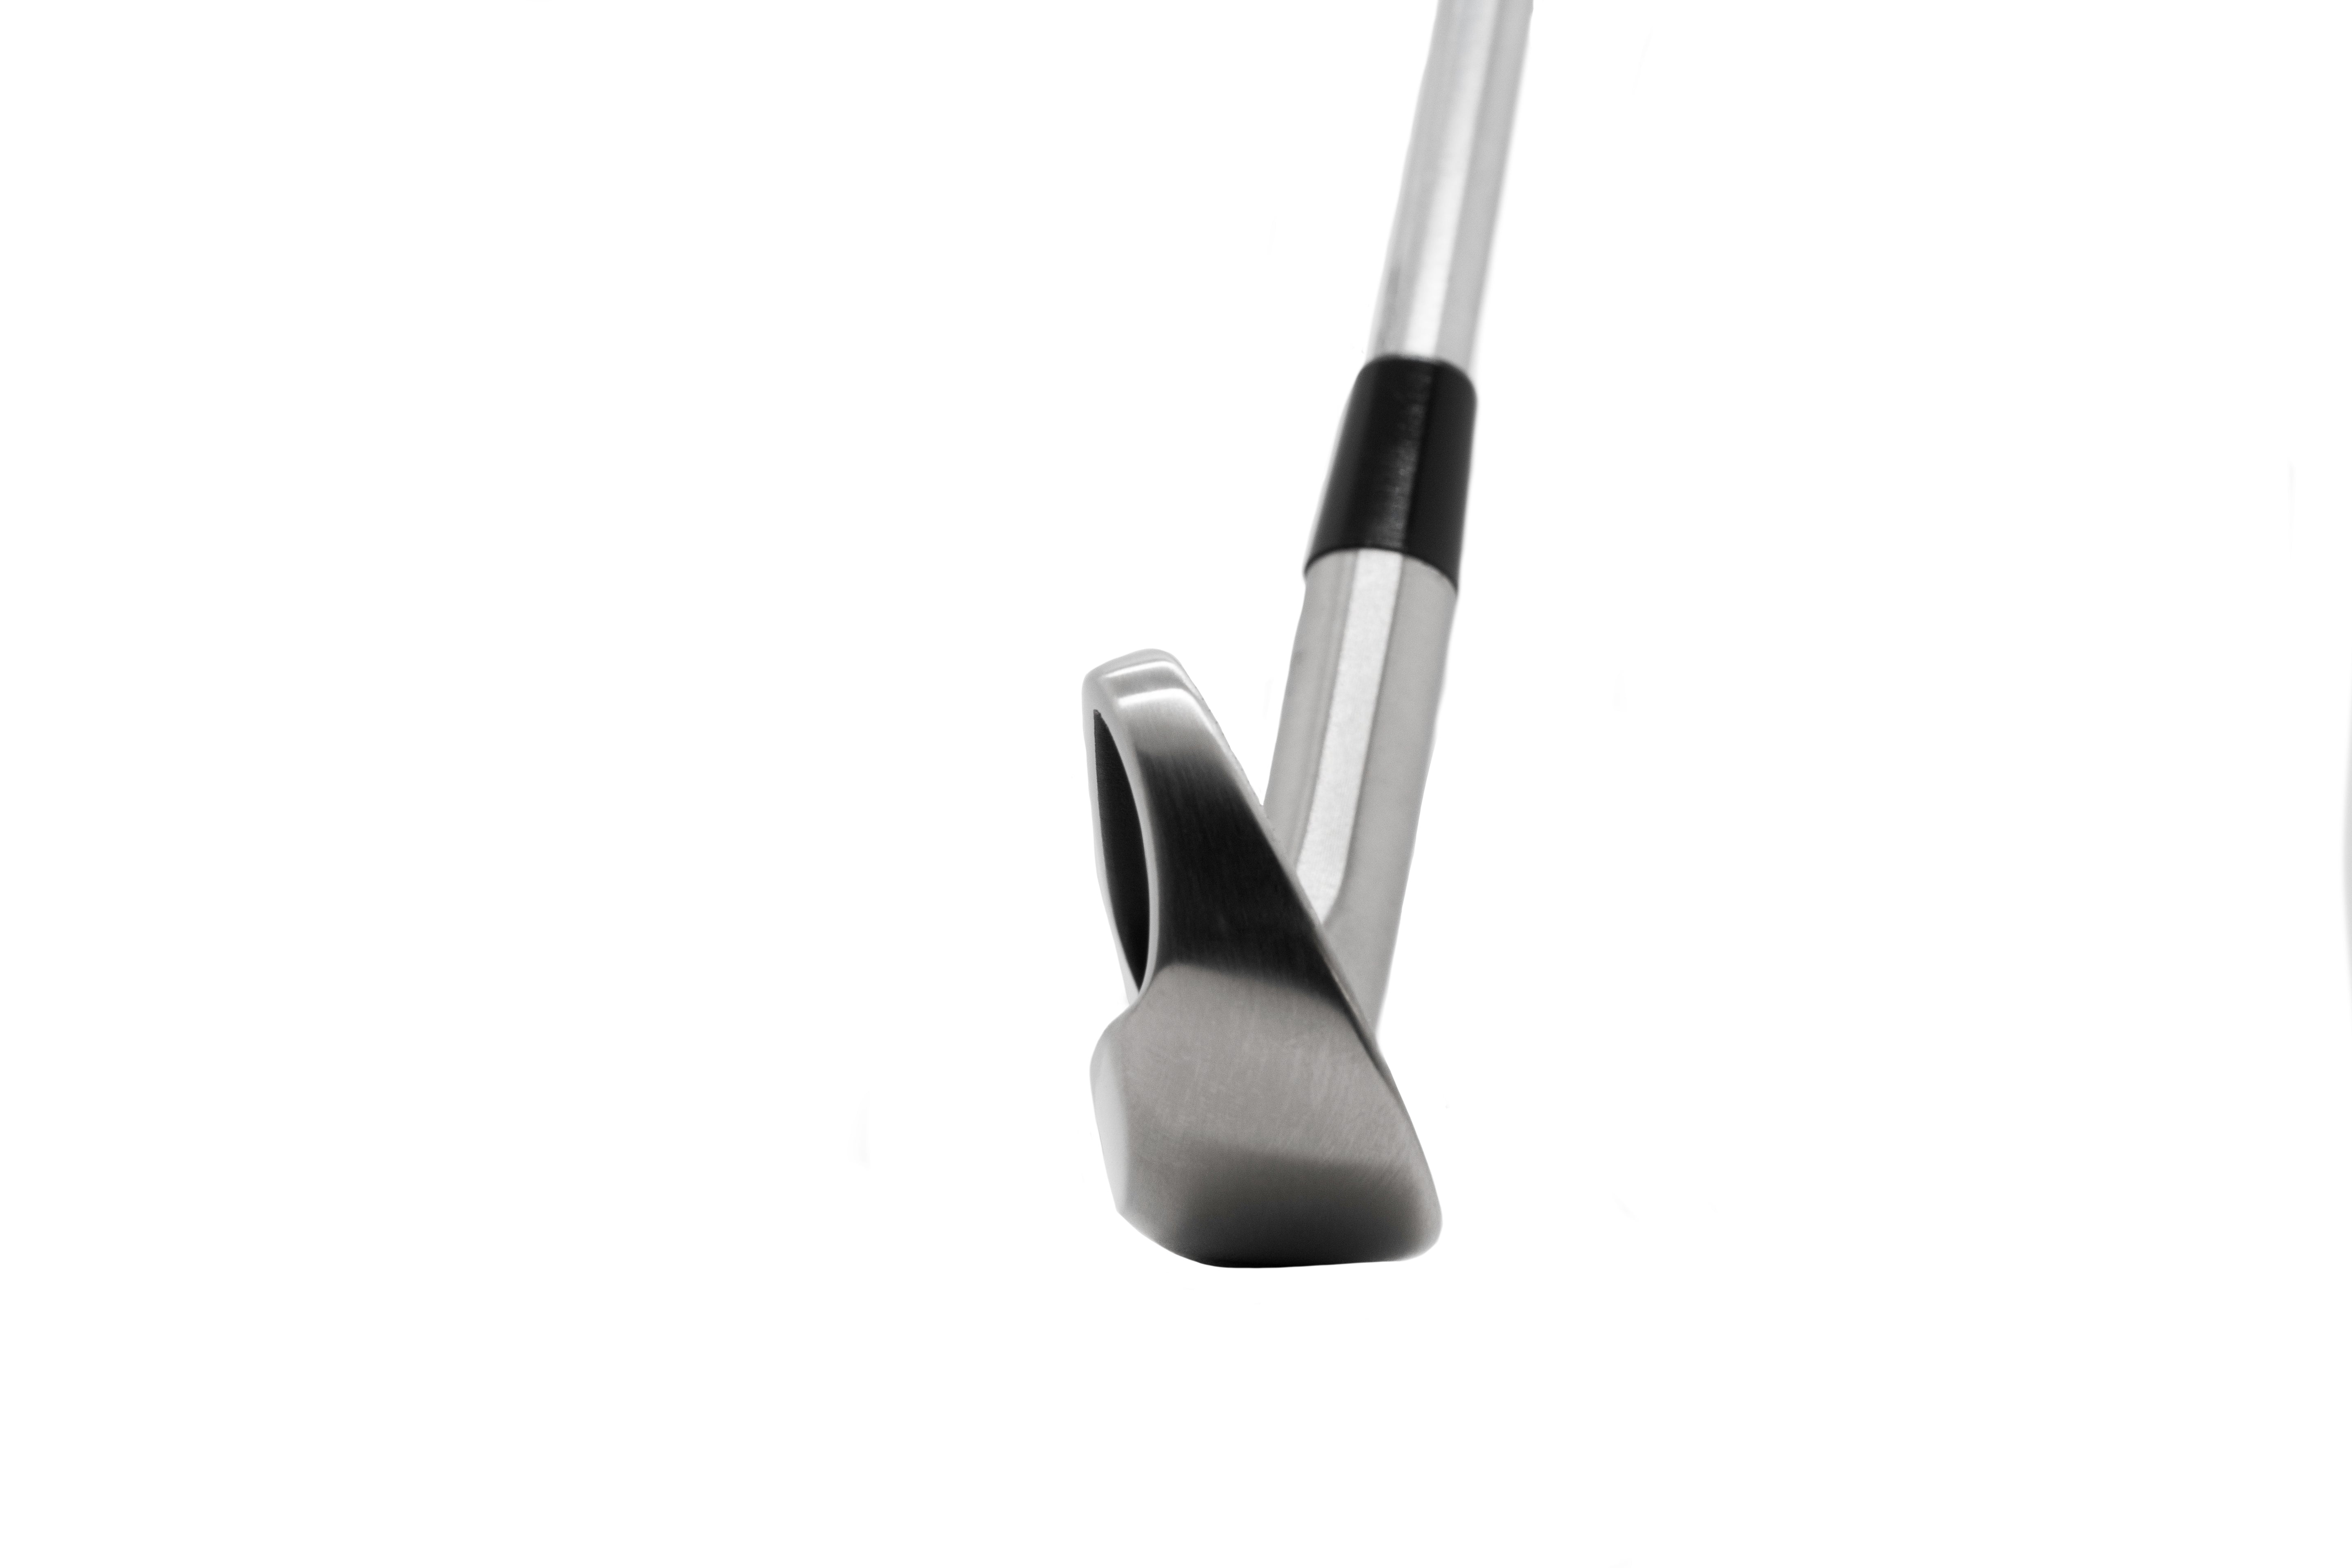 The Vipper by Vertical Groove Golf (VGG)